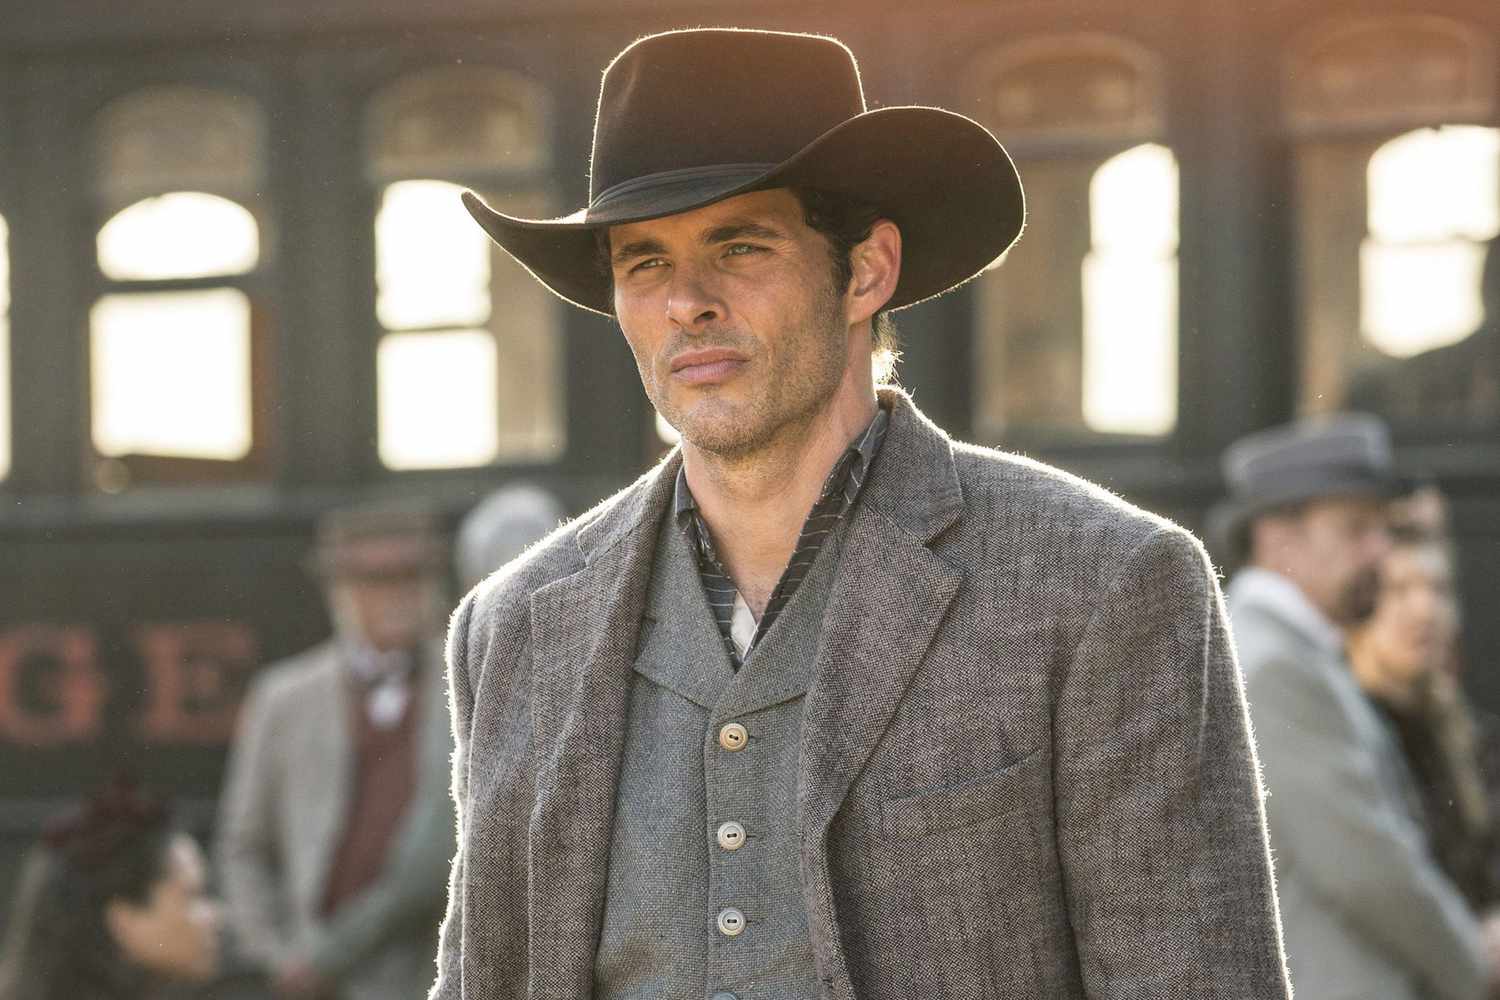 Editorial use only. No book cover usage. Mandatory Credit: Photo by Bad Robot/Kobal/Shutterstock (7749141bx) James Marsden 'Westworld' TV Series Season 1 - 2016